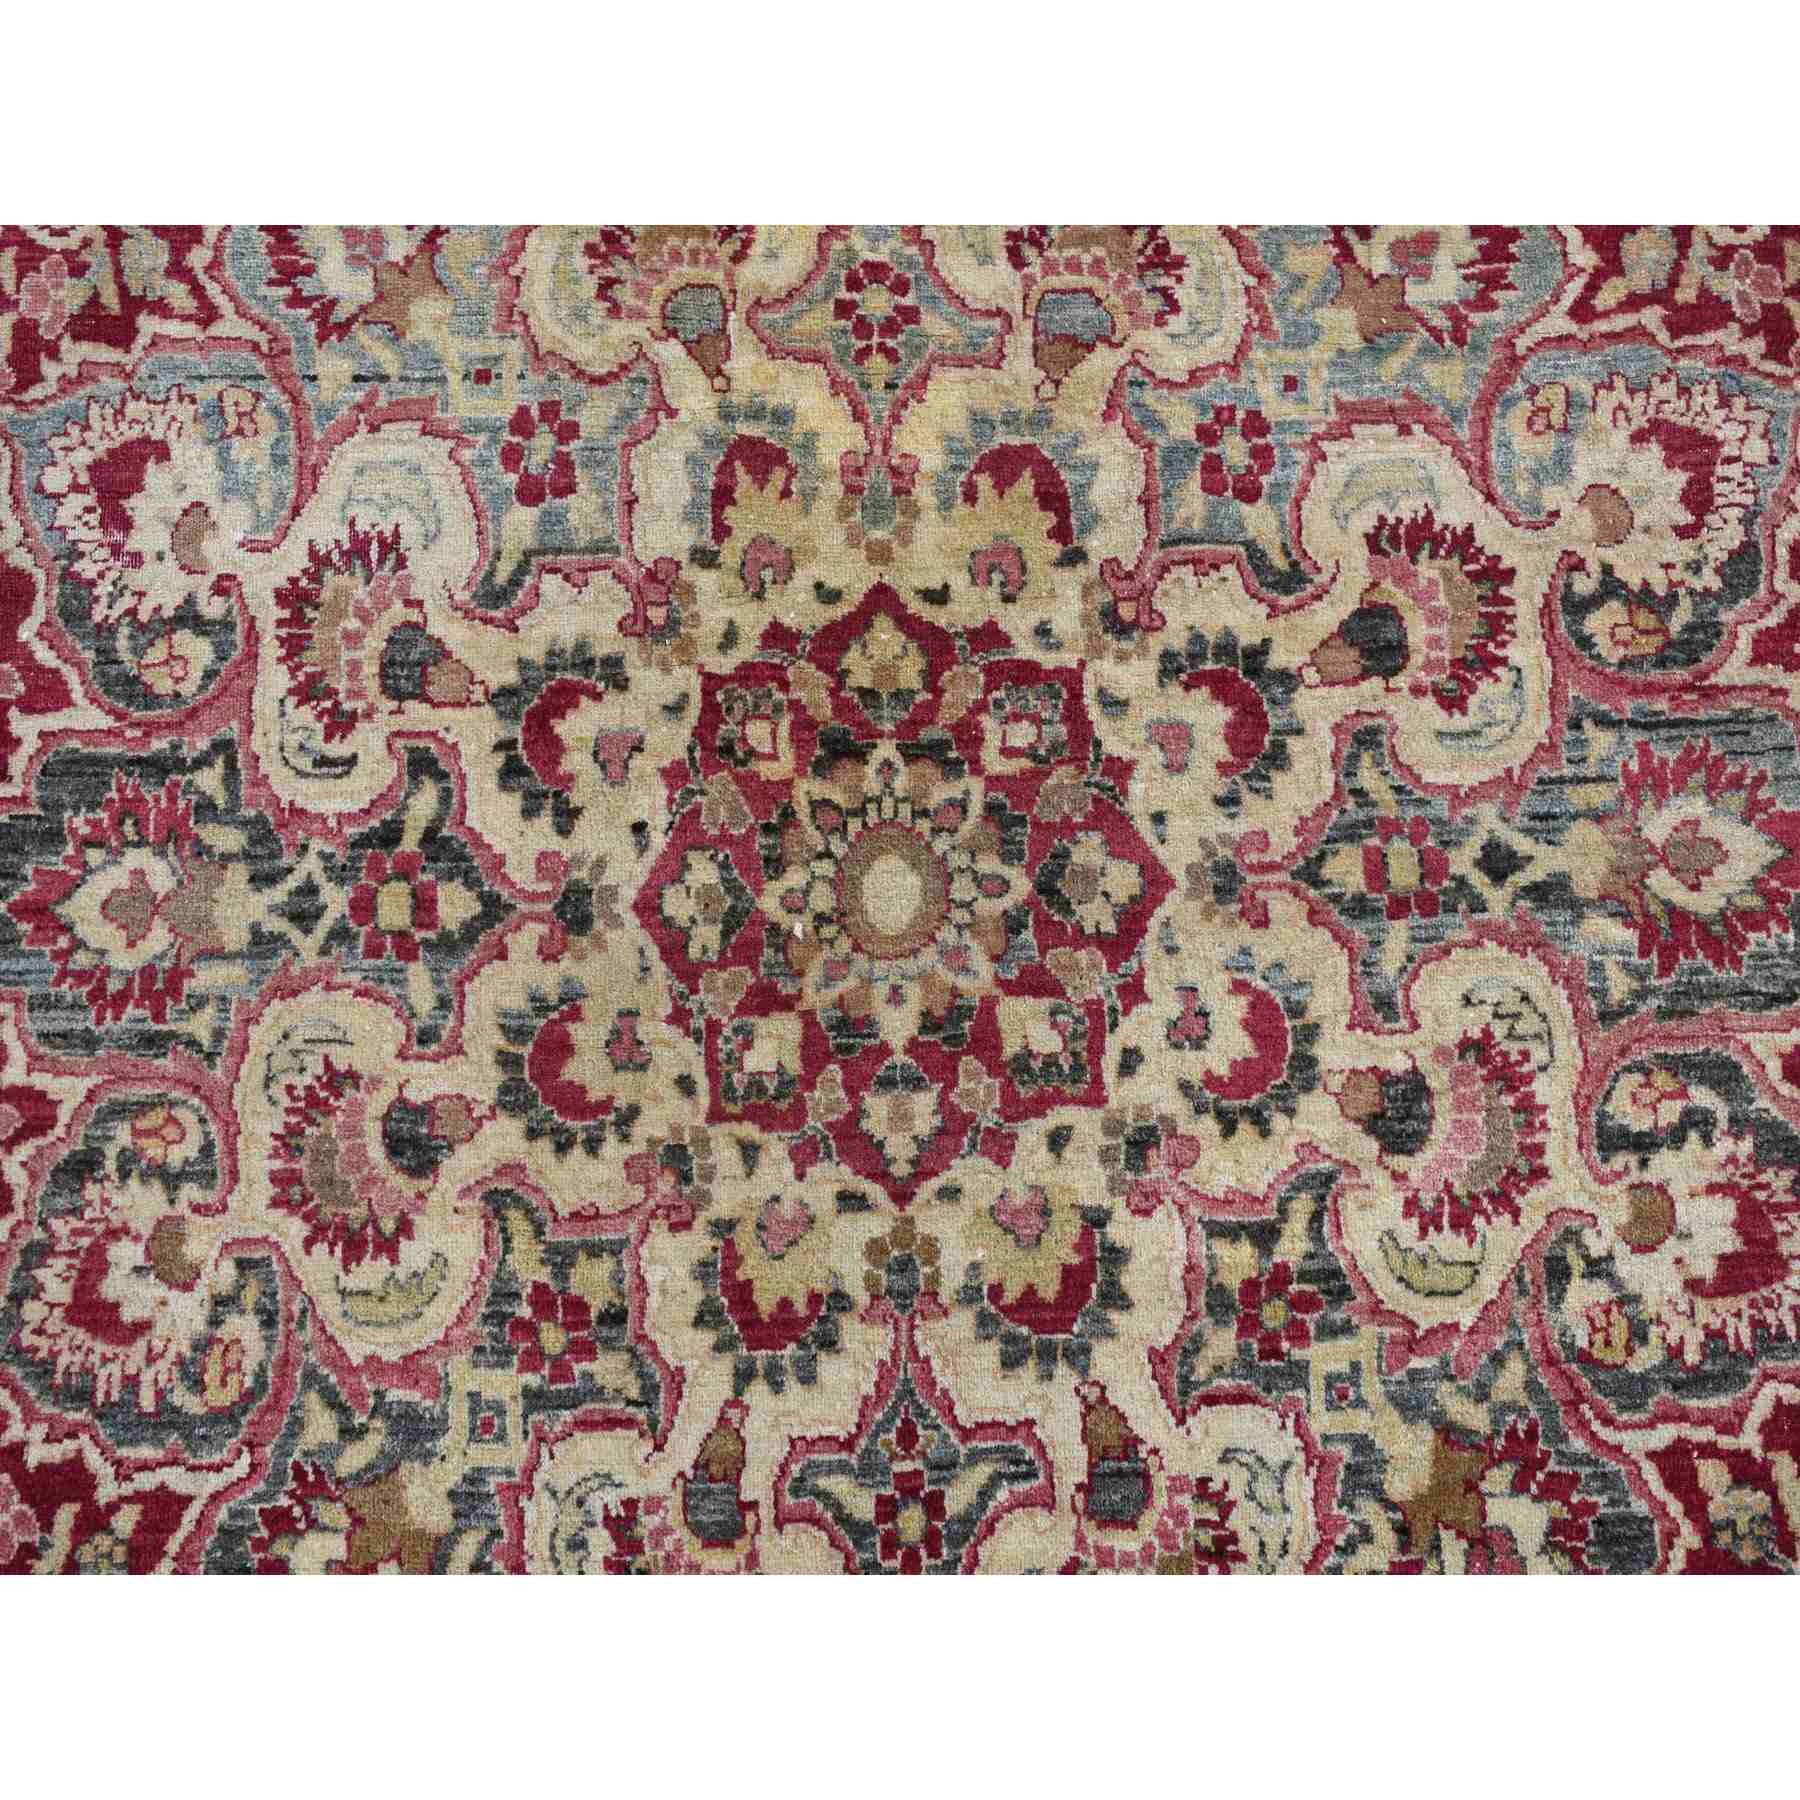 Antique-Hand-Knotted-Rug-390415